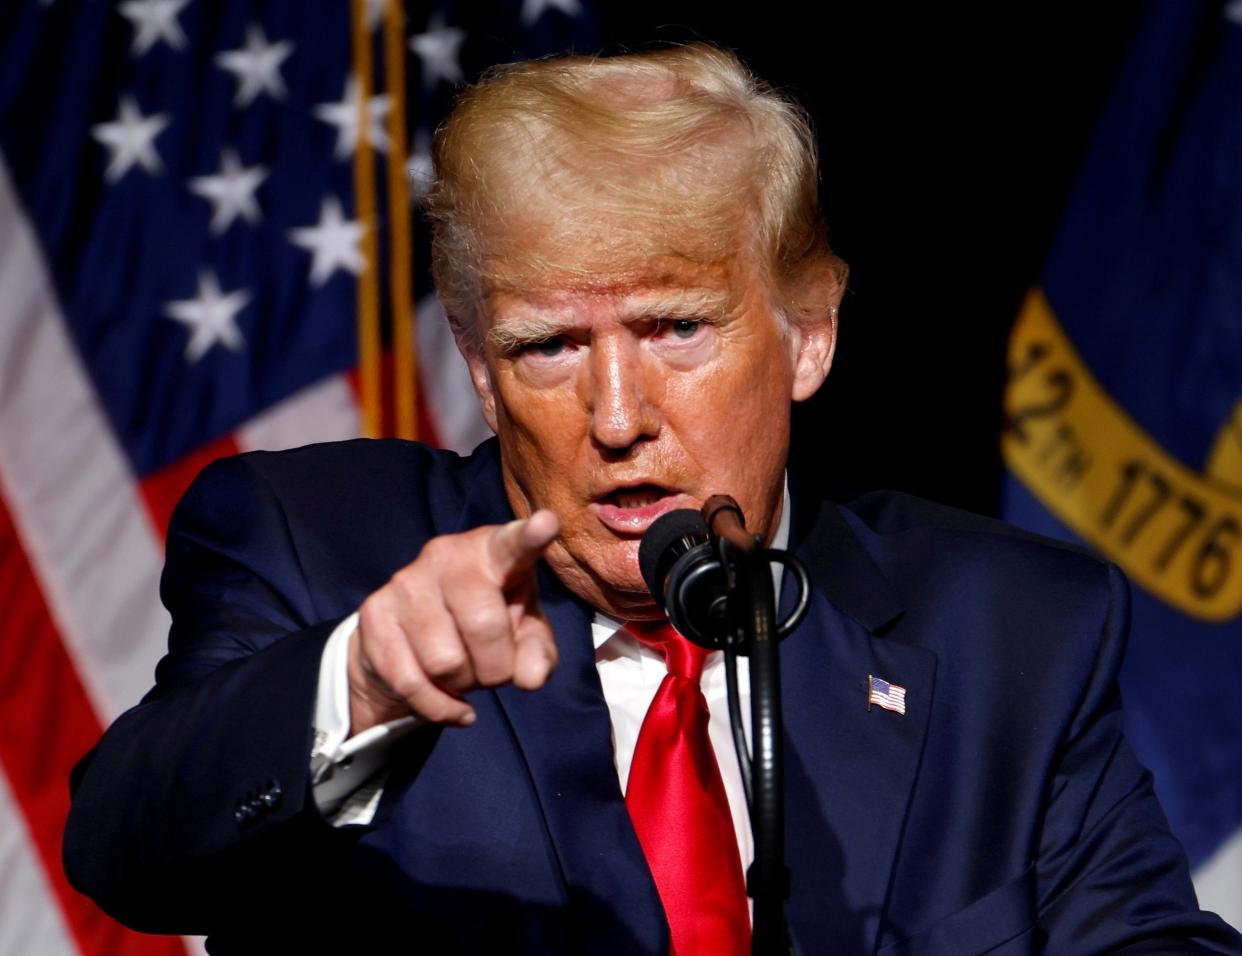 File image: Former US President Donald Trump points at the media while speaking at the North Carolina GOP convention dinner in Greenville, North Carolina, US, on 5 June, 2021 (REUTERS)